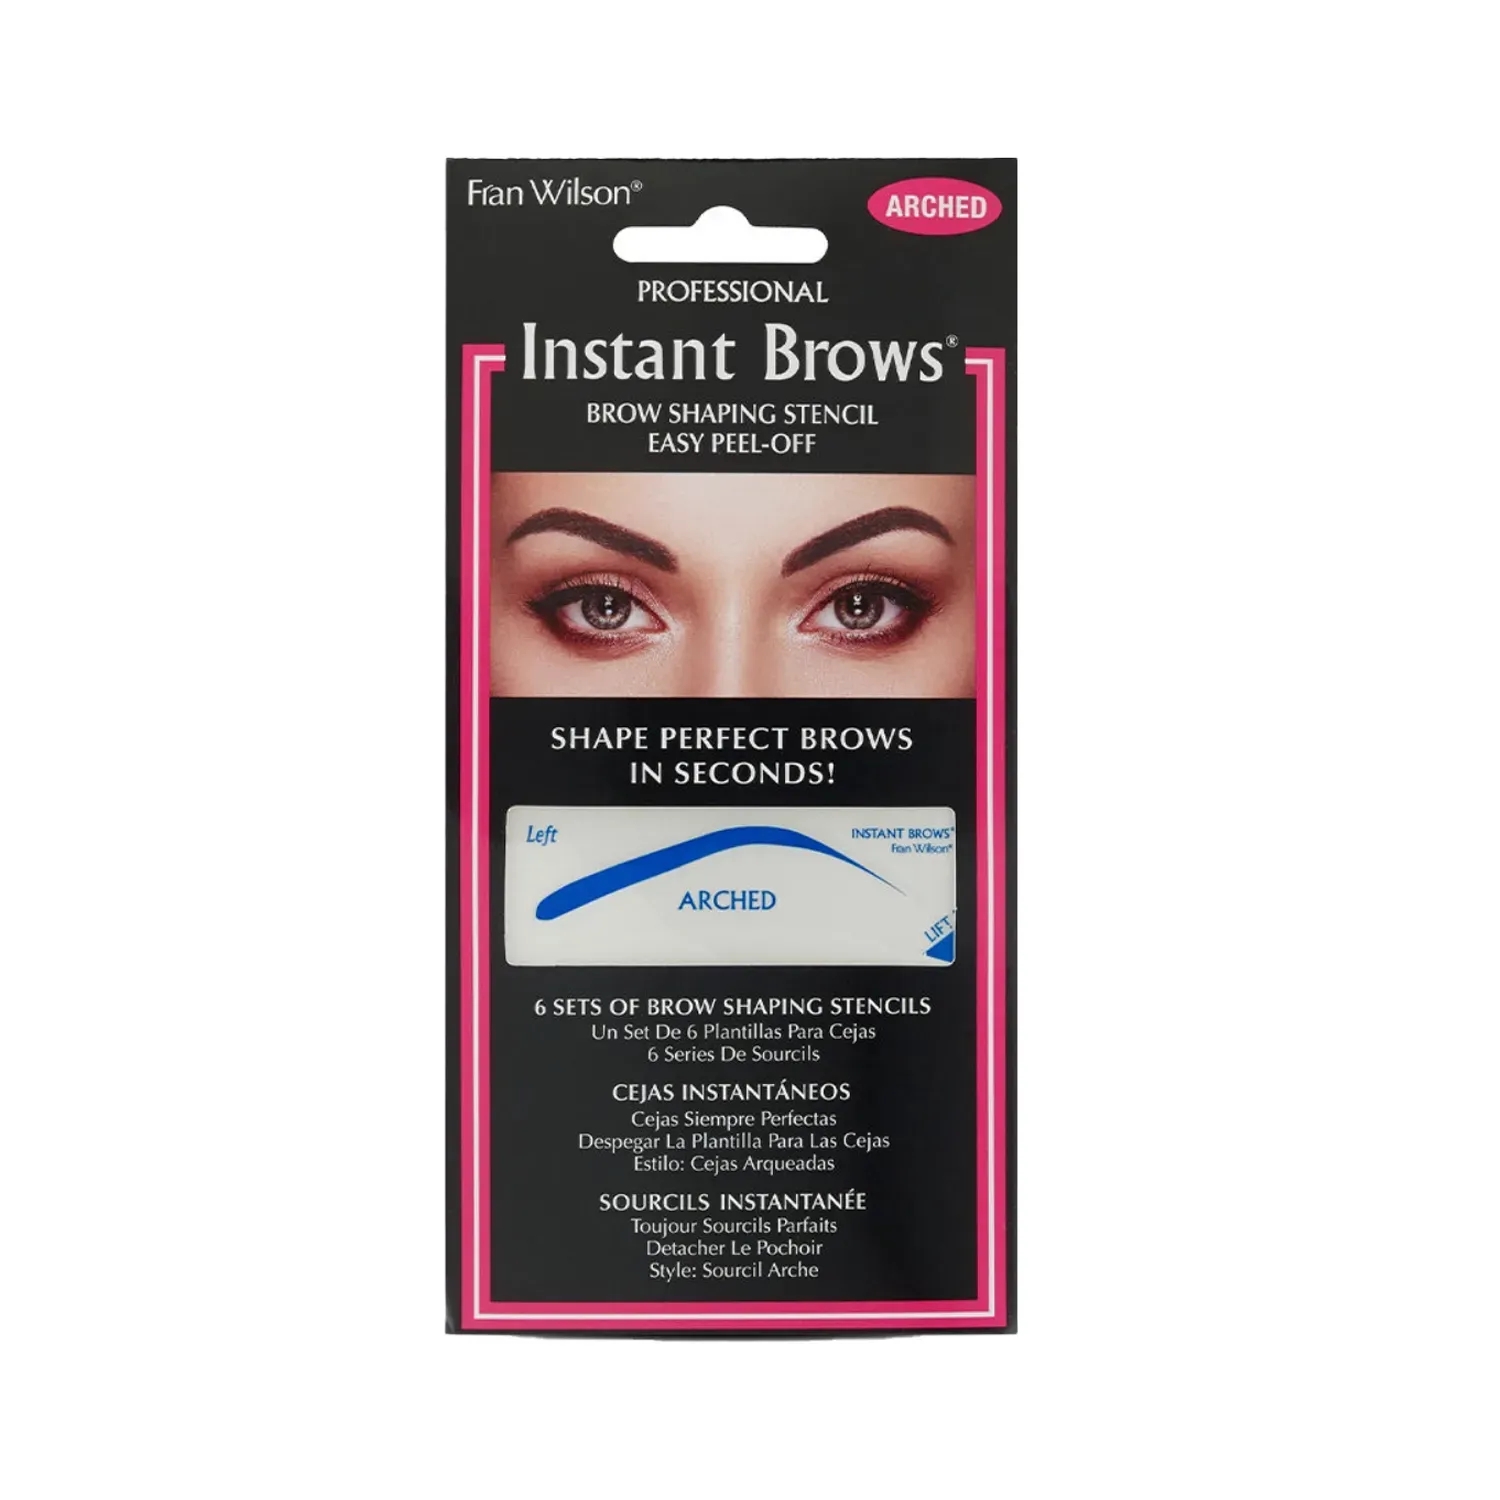 Fran Wilson Moodmatcher | Fran Wilson Moodmatcher Instant Brows Shaping Stencil - Arched (Set of 6)